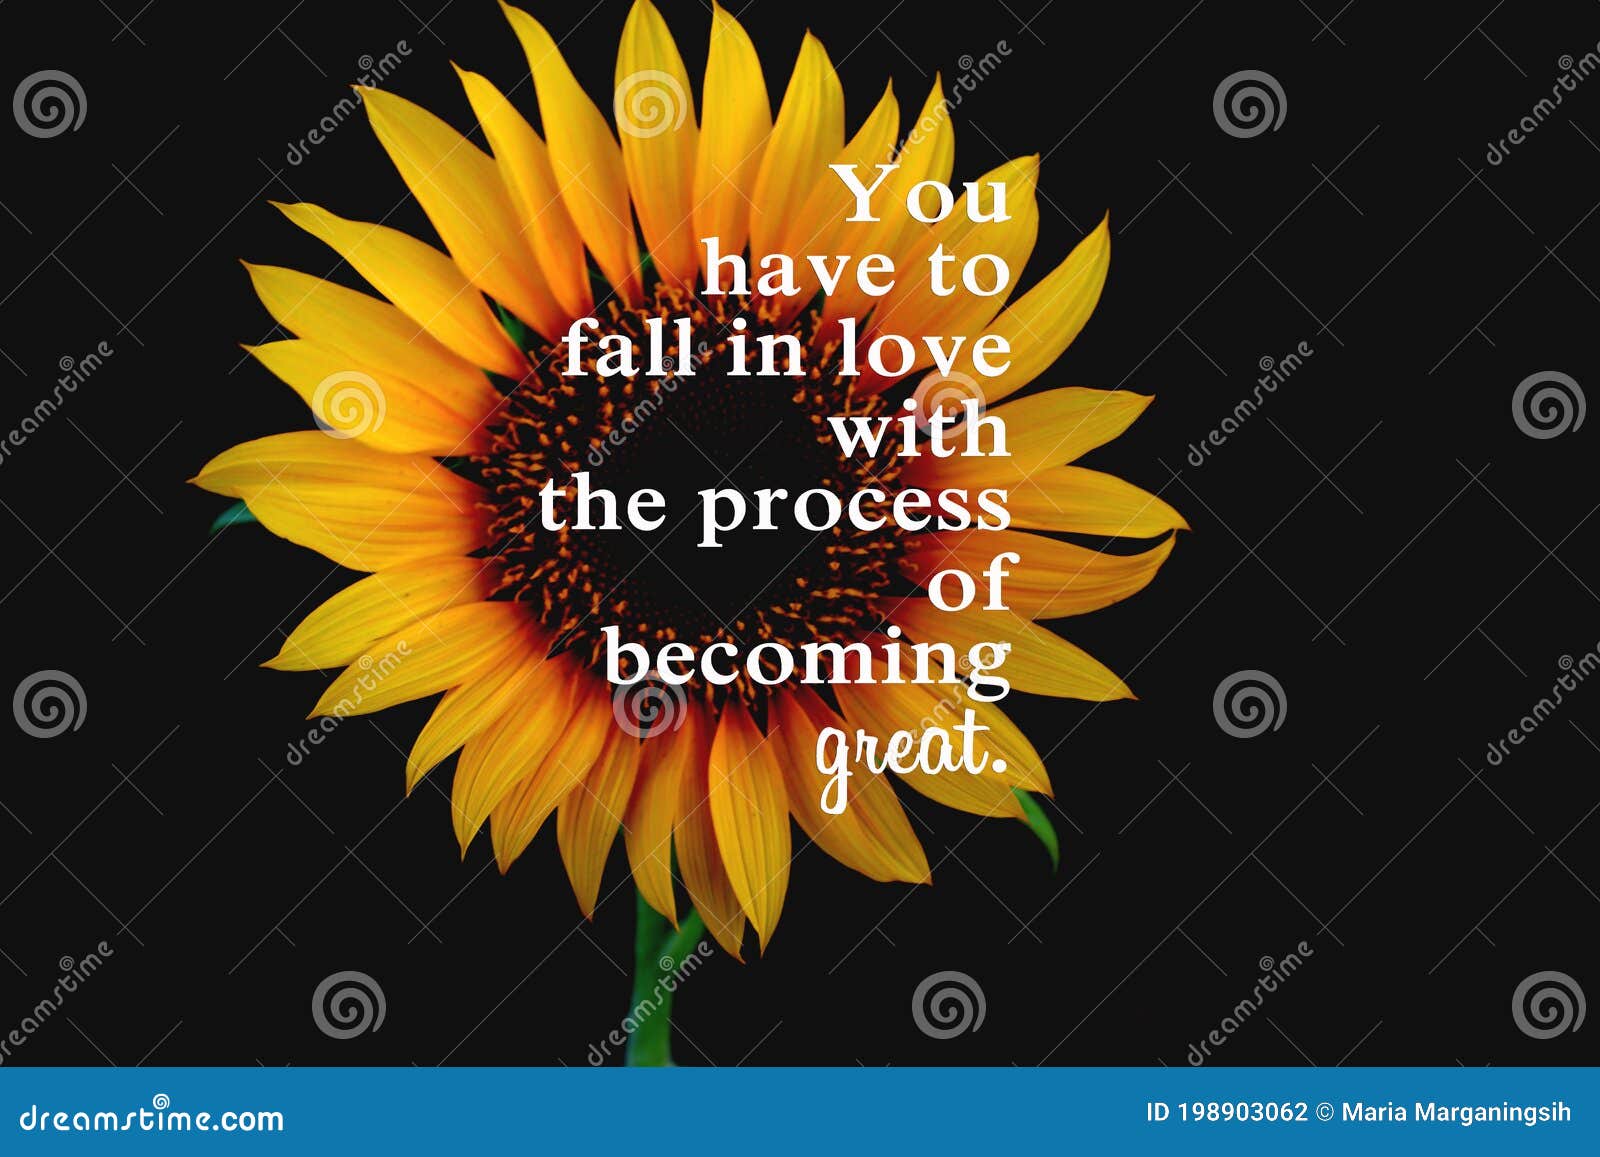 124 Fall Love Quote Photos Free Royalty Free Stock Photos From Dreamstime